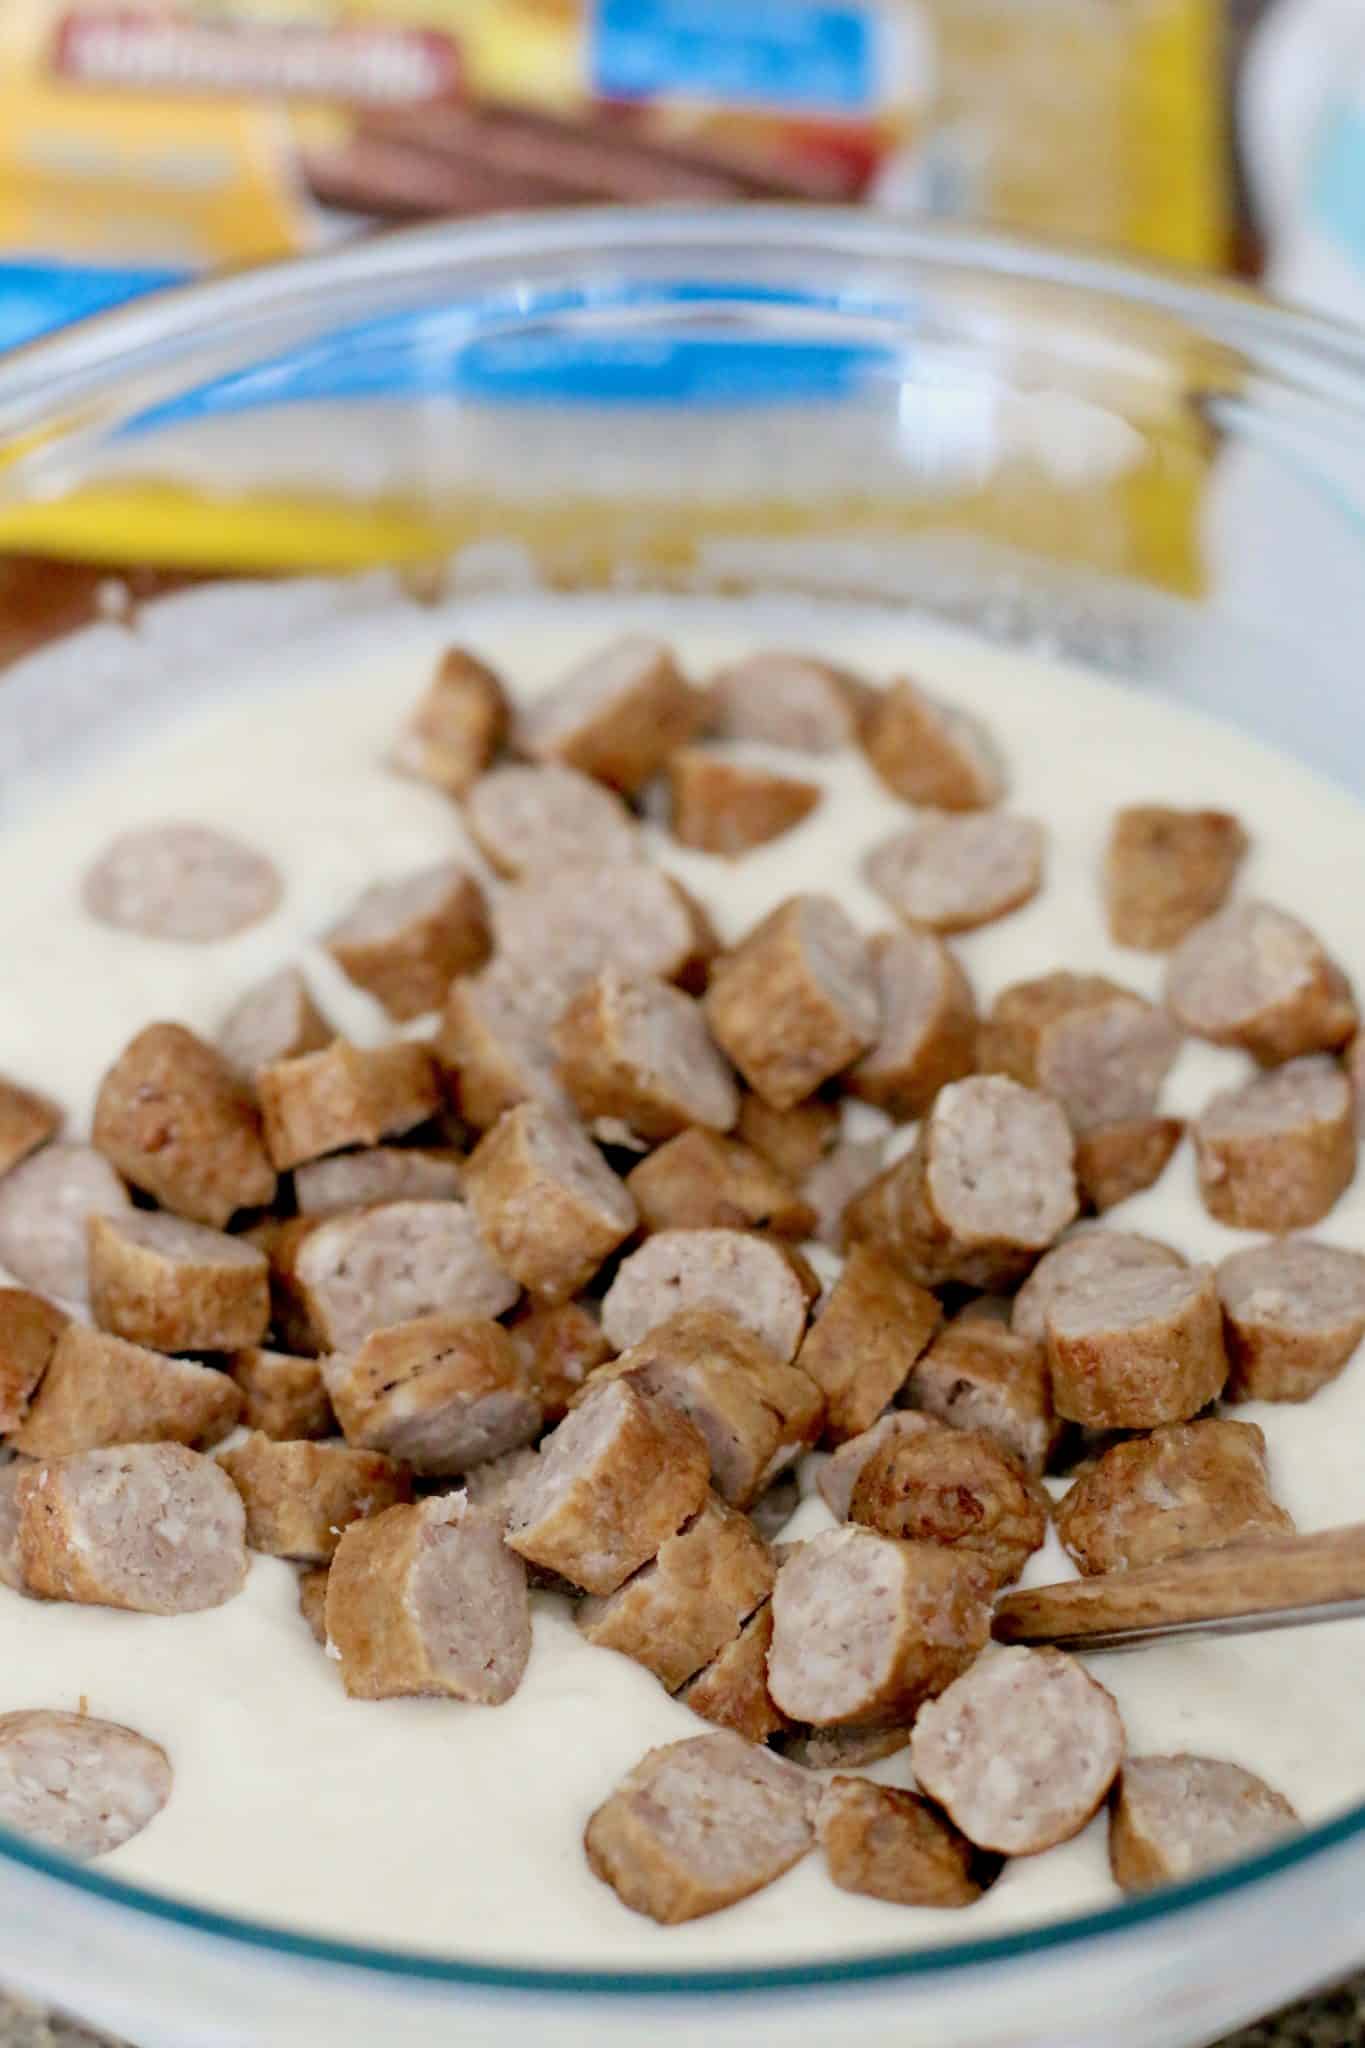 sliced cooked breakfast sausages on top of prepared pancake batter mix in a bowl.